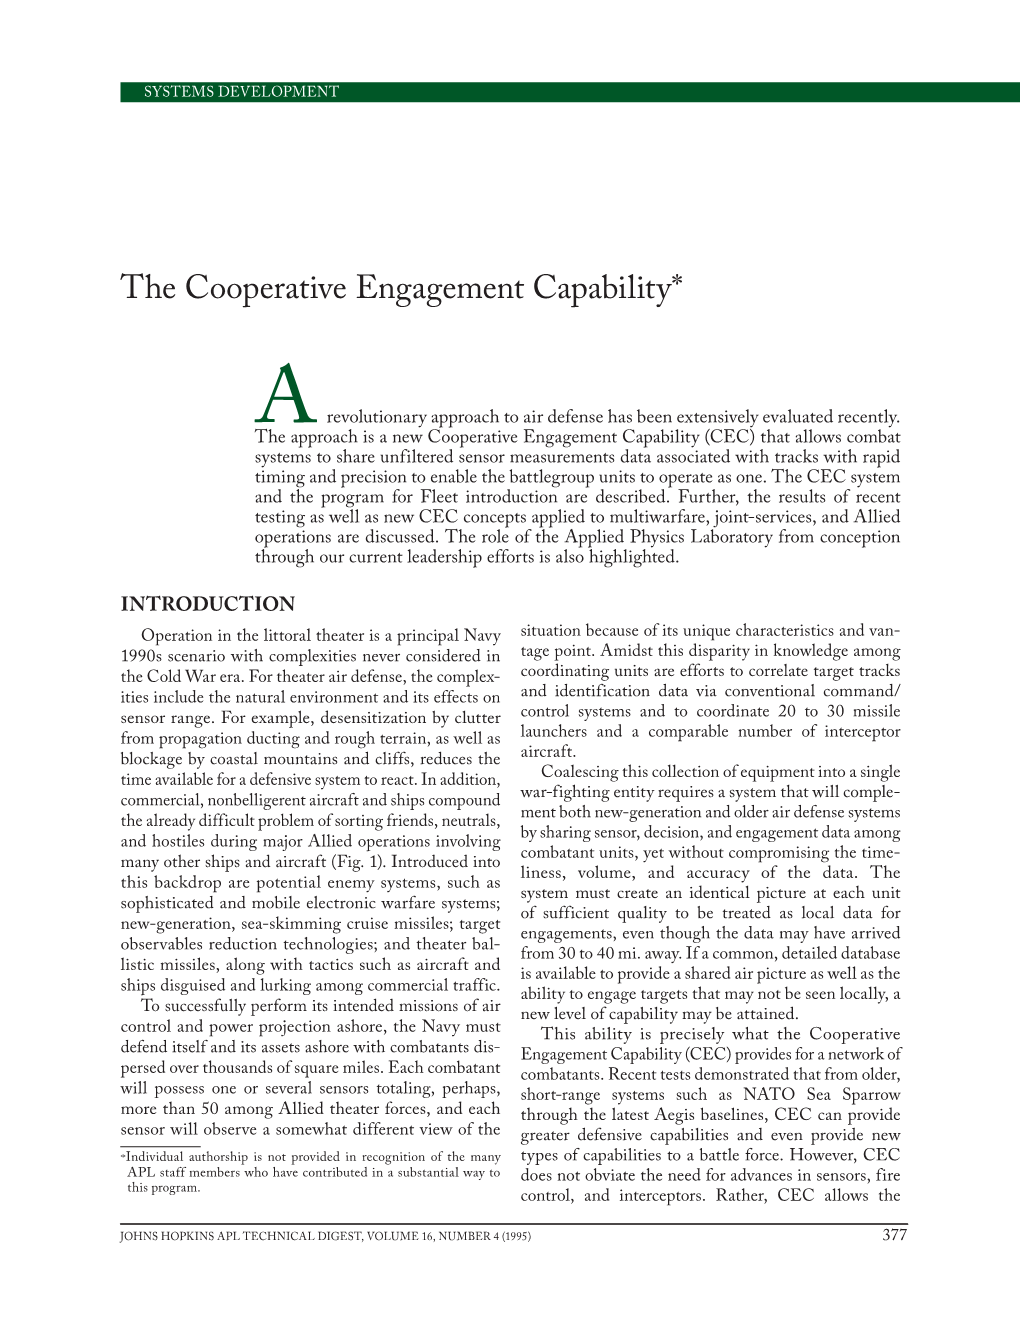 The Cooperative Engagement Capability*